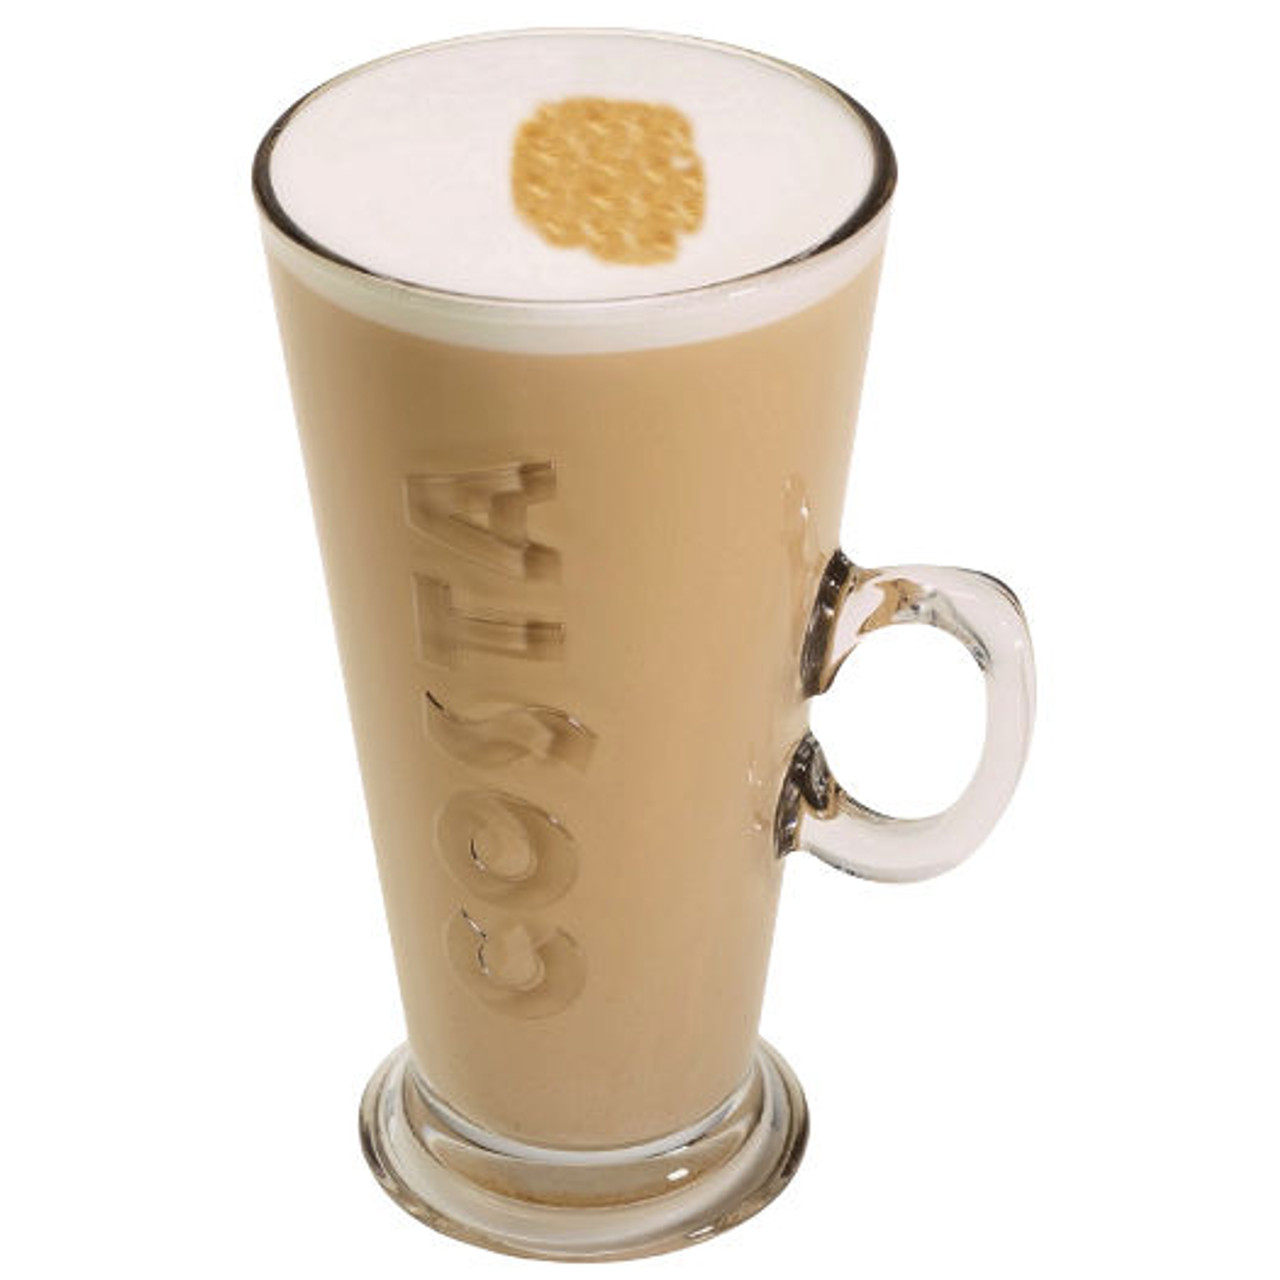 https://cdn11.bigcommerce.com/s-tjx0gy7pkp/images/stencil/1280x1280/products/15972/26587/Costa_medio_large_latte_glass_44cl__28277.1650794736.jpg?c=2